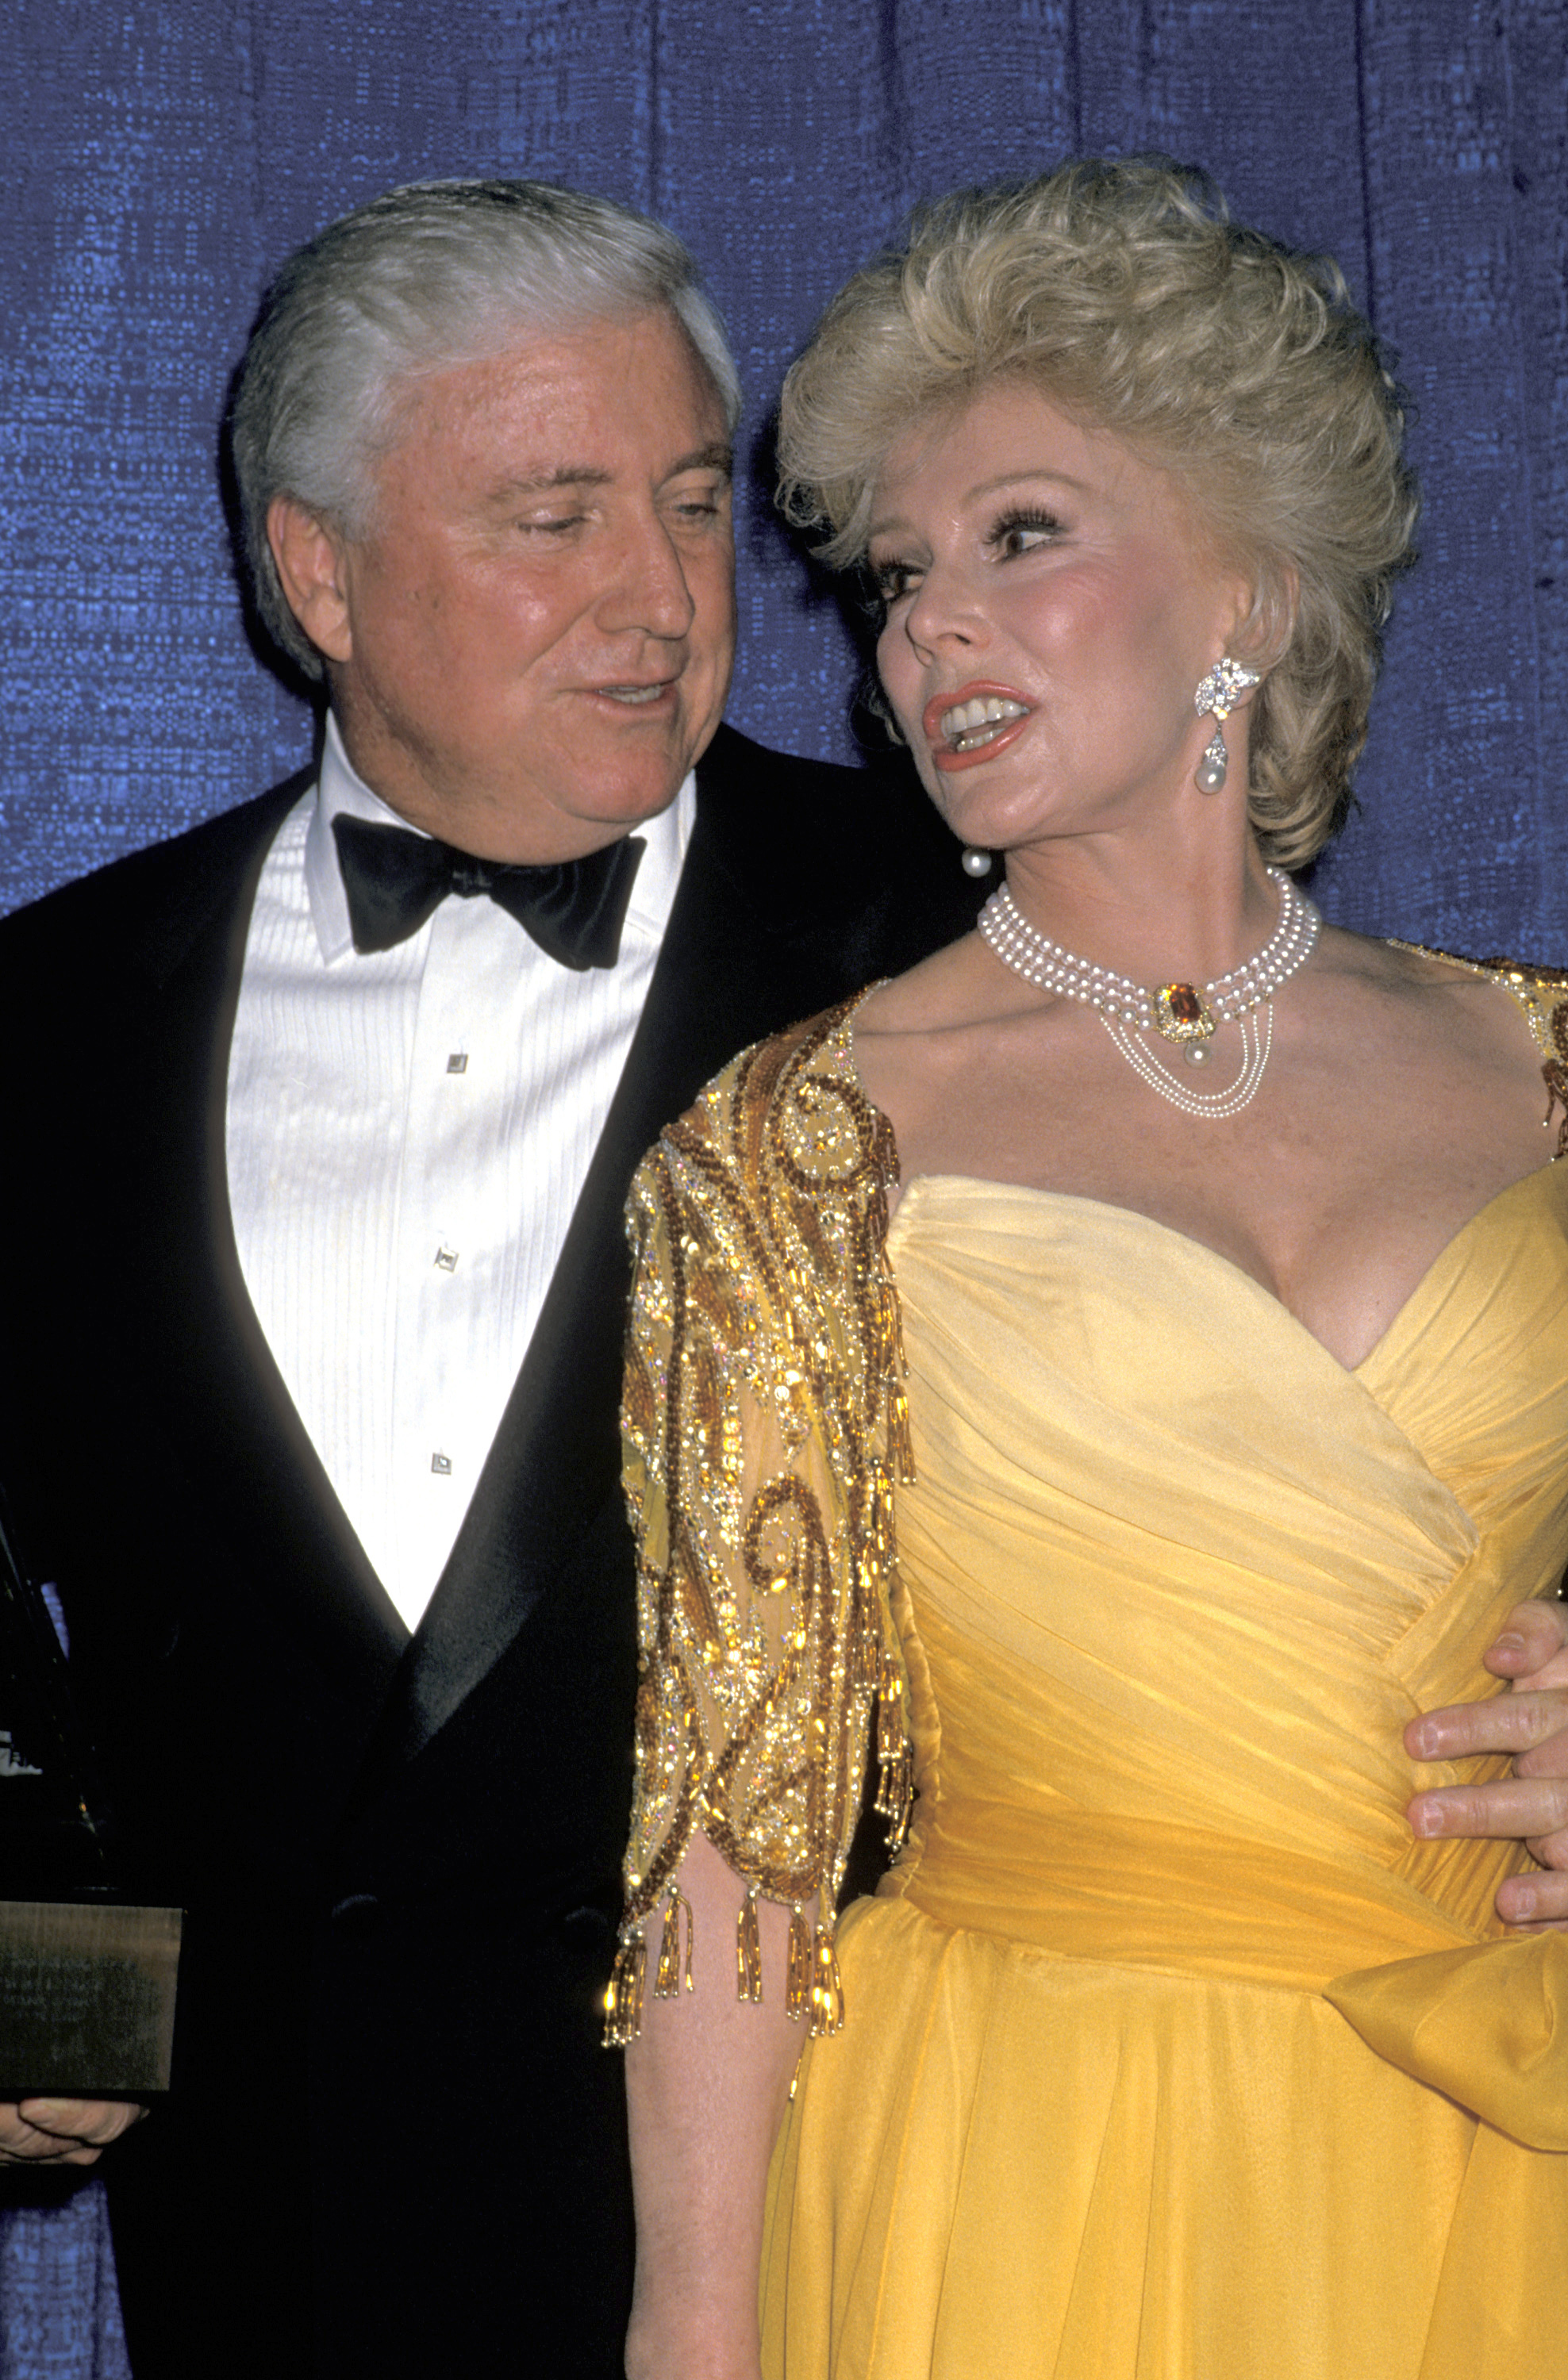 Merv Griffin and Eva Gabor at the 20th Annual Scopus Awards in 1990 | Source: Getty Images